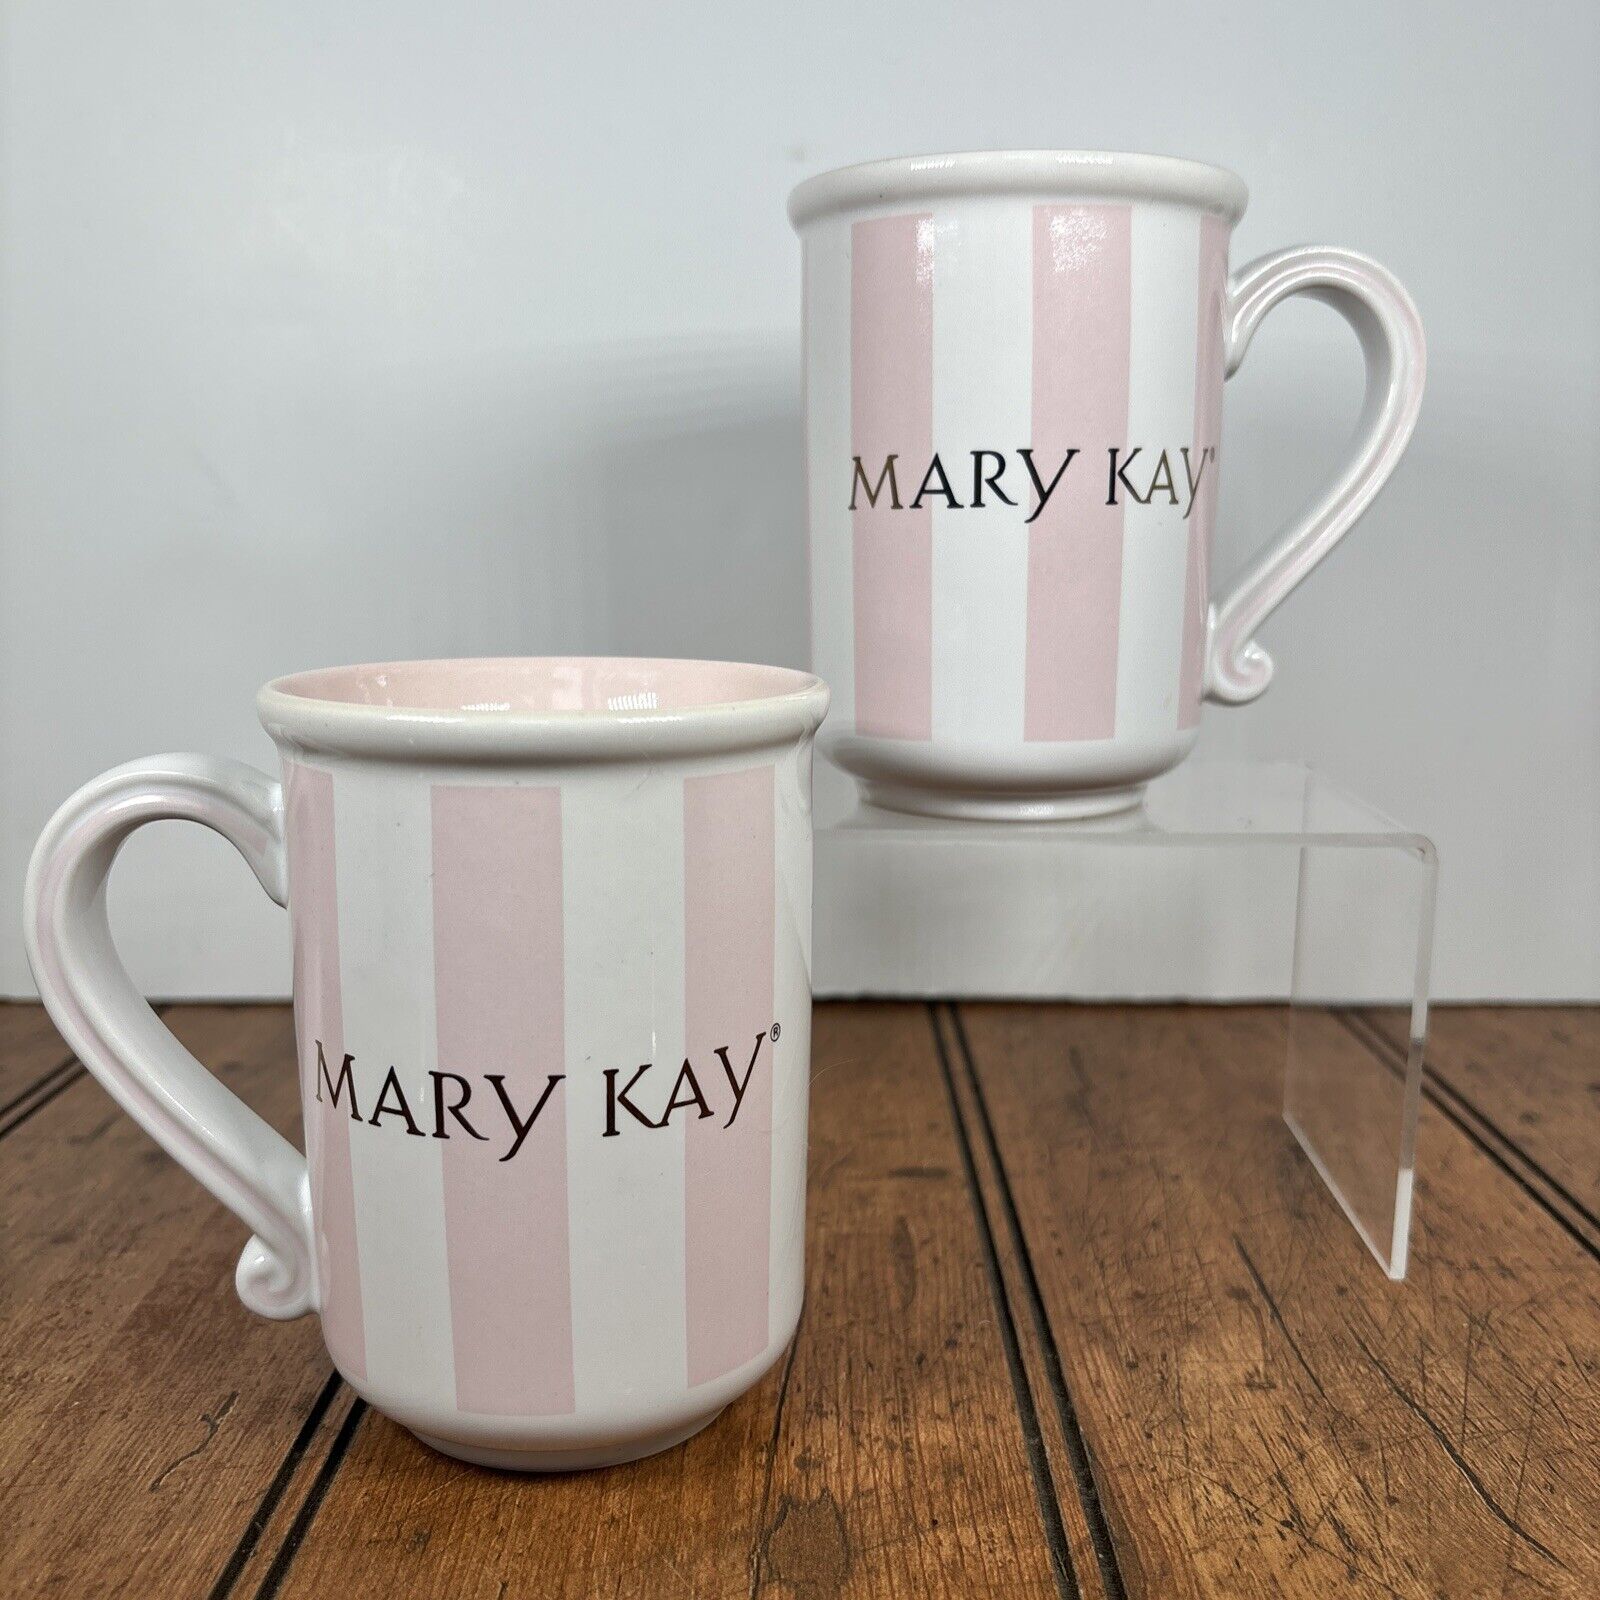 VTG 2 MARY KAY Coffee Mug Cup Pink & White Stripe, Gold Letters Pink In Handle